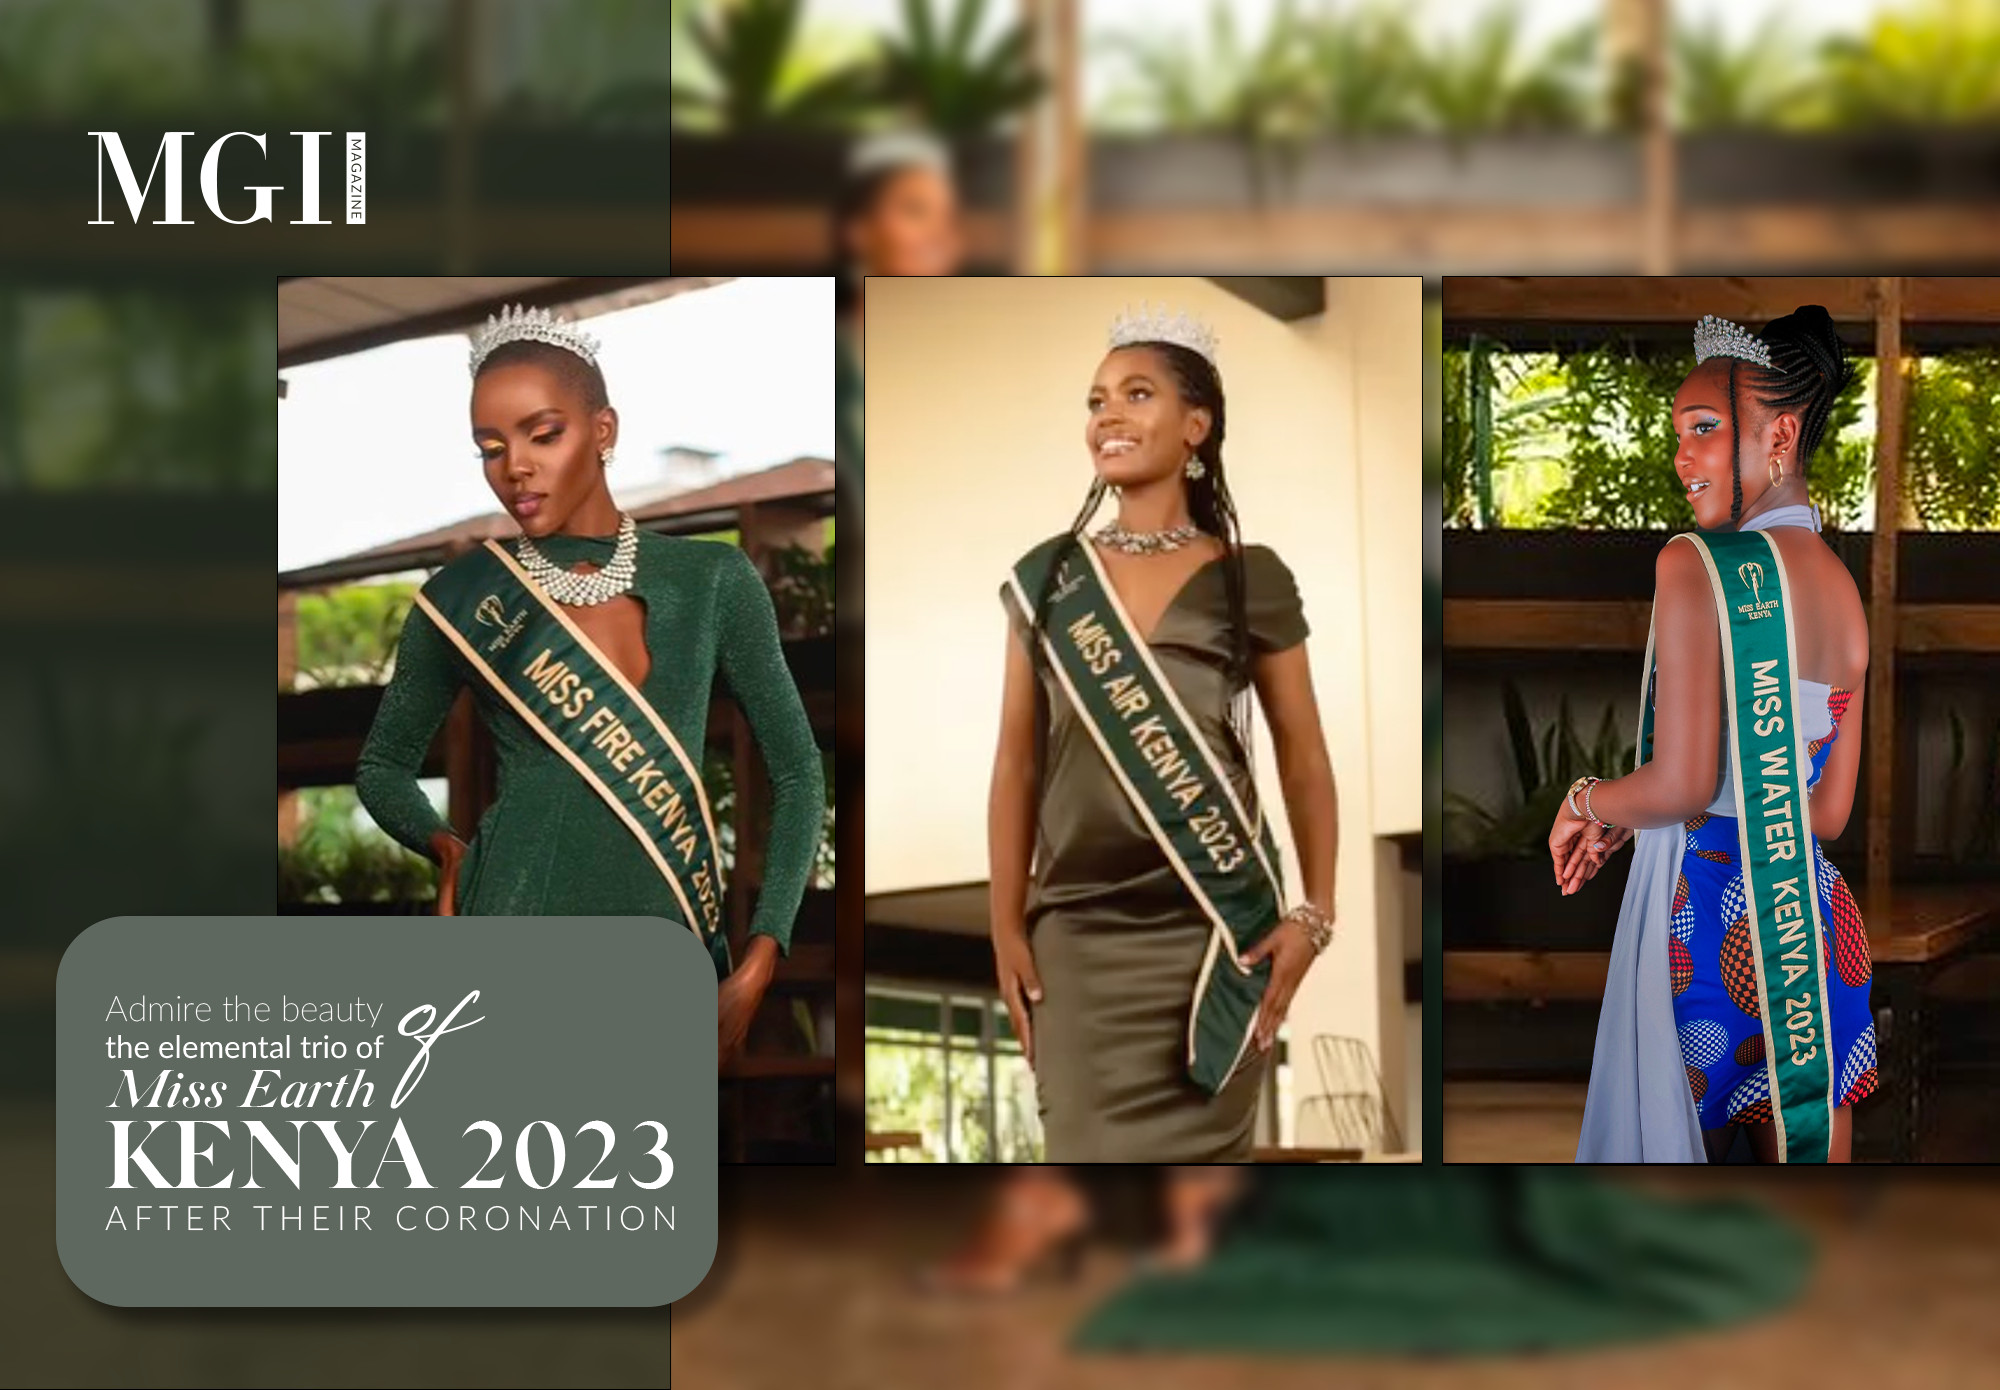 Admire the beauty of the elemental trio of Miss Earth Kenya 2023 after their coronation